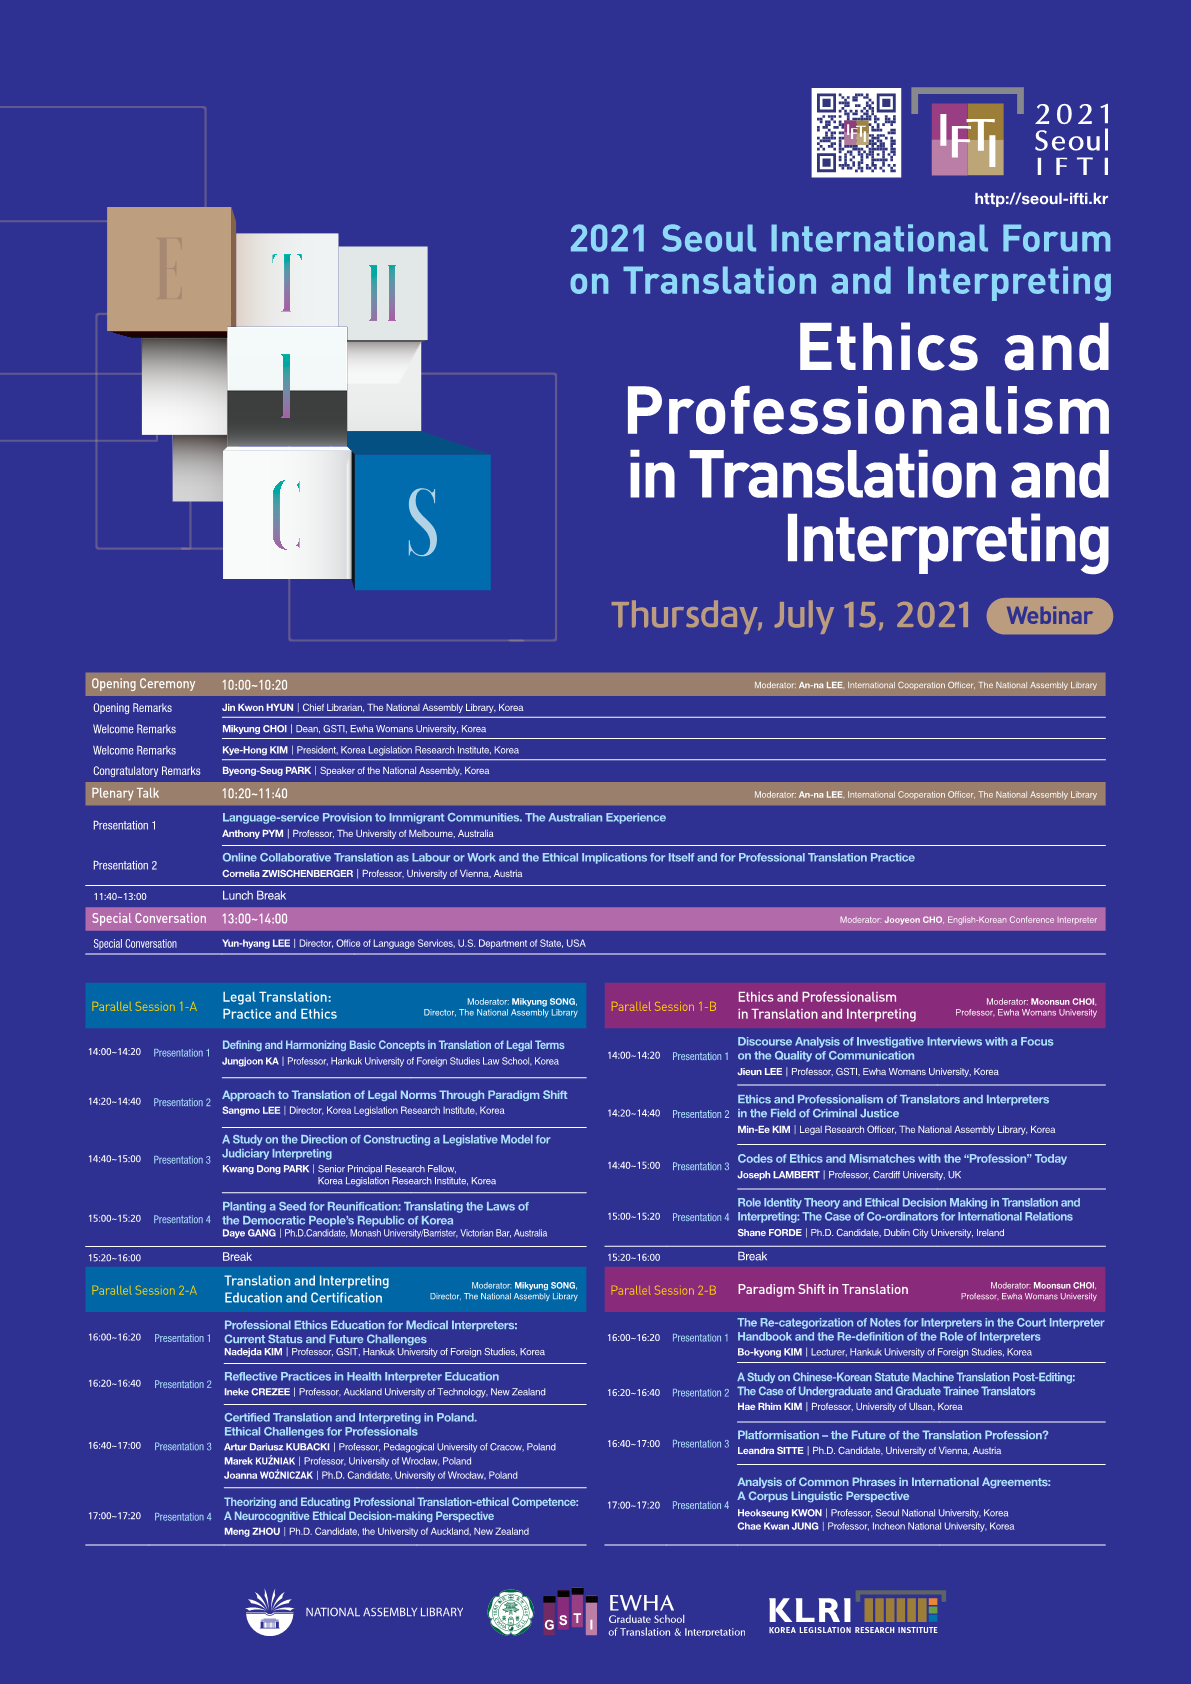 2021 Seoul IFTI http://seoul-ifti.kr 2021 Seoul International Forum on Translation and Interpreting Ethics and Professionalism in Translation and Interpreting Thursday, July 15, 2021 Webinar, Opening Ceremony 10:00~10:20 Moderator: An-na Lee, International Cooperation Officer, The National Assembly Library, Opening Remarks Jin Kwon HYUN Chief Libration, The National Assembly Library, Korea, Welcome Remarks Mikyung CHOI Dean, GSTI, Ewha Womans University, Korea, Welcome Remarks Kye-Hong KIM President, Korea Legislation Research Institute, Korea, Congratulatory Remarks Byeong-PARK Speaker of the National Assembly, Korea, Plennary Talk 10:20~11:40 Moderator: An-na Lee, International Cooperation Officer, The National Assembly Library, Presentation 1 Language-service Provision to Immigrant Communities, The Australian Experience Anthony PYM Professor, The University of Melbourne, Australia, Presentation 2 Online Collaborative Translation as Labour or Wokr and the Ethical Implications for Itself and for Professional Translation Practice Cornelia ZWISCHENBERGER Professor, University of Vienna, Austria, 11:40~13:00 Lunch Break, Special Converstion 13:00~14:00 Moderator: Jooyeon CHO, English-Korean Conference Interpreter, Special Converstion Yun-hyang LEE Director, Office of Language Service, U.S. Department of State, USA, Paralle Session 1-A Legal Translation: Practice and Ethics Moderator: Mikyung SONG, Director, The National Assembly Library 14:00~14:20 Presentation1 Definig and Harmonizing Basic Concepts in Translation of Legal Terms Jungjoon KA Professor, Hankuk University of Foreign Studies Law School, Korea, 14:20~14:40 Presentation 2 Approach to Translation of Legal Norms Thorugh Paradigm Shift Sangmo LEE Director, Korea Legislation Research Institute, Korea, 14:40~15:00 Presentation 3 A Study on the Direction of Constructing a Legislative Model for Judiciary Interpreting Kwang Dong PARK Senior Principal Research Fellow, Korea Legislation Research Institute, Korea, 15:00~15:20 Presentation 4 Planting a Seed for Reunification: Translating the Laws of the Democratic People's Republic of Korea Daye GANG Ph.D.Candidate, Monash University/Barrusterm Victorian Barm Australiam 15:20~16:00 Break, Parallel Session 2-A Translation and Interpreting Education and Certification Moderator: Mikyung SONG, Director, The National Assembly Library, 16:00~16:20 Presentaion 1 Professional Ethics Education for Medical Interpreters: Current Status and Future Challenges Nadejda KIM Professor, GSIT, Hankuk University of Foreign Studies, Korea, 16:20~16:40 Presentation 2 Reflective Practices in Health Interpreter Education Inele CREZEE Professor, Auchland University of Technology, New Zealand, 16:40~17:00 Presentation 3 Certified Translation and Interpreting in Poland. Ethical Challenges for Professionals Artur Dariusz KUBACKL Professor, Pedagogical University of Cracow, Poland MAREK KUZNIAK Professor, University of Wroclaw, Poland Joanna WOZNICZAK Ph.D. Candidate, University of Wroclaw, Poland 17:00~17:20 Presentation 4 Theorizing and Educating Professional Translation-ethical Competence: A Neurocognitive Ethical Decision-making Perspective Meng ZHOU Ph.D.Candiate, the University of Auckland, New Zealand, Parallel Session 1-B Ethics and Professionalism in Translation and Interpreting Moderator: Moonsun CHOI Professor, Ewha Womans University 14:00~14:20 Presentation 1 Discorse Analysis of Investigative Interviews with a Focus on the Quality of Communication Jieyn LEE Professor, GSTI, Ewha Womans University, Korea 14:20~14:40 Presentation 2 Ethics and Professionalism of Translators and Interpreters in the Field of Criminal Justice Min-EM KIM Legal Research Officer, The National Assembly Library, Korea, 14:40~15:00 Presentation 3 Codes of Ethics and Mismatches with the 'Profession' Today Joseph LAMBERT Professor, Cardiff University, UK, 15:00~15:20 Presentation 4 Role Identity Theory and Ethical Decision Making in Translation and Interpreting: The Case of Co-ordinators for International Relations Shane FORDE Ph.D.Candidate, Dublin City University, Ireland, 15:20~16:00 Break, Parallde Session 2-B Paradigm Shift in Translation Moderator: Moonsun CHOI, Professor, Ewha Womans University 16:00~16:20 Presentation 1 The Re-categorization of Notes for Interpreters in the Court Interpreter Handbook and the Re-definition of the Role of Interpreters Bo-kyoung KIM Lecturer, Hankuk University of Foreign Studies, Korda, 16:20~16:40 Presentation 2 A Study on Chinese-Korean Statute Machine Translation Post-Editing: The Case of Undergraduate and Graduate Trainee Translators Hae Rhim KIM Professor, University of Ulsan, Korea, 16:40~17:00 Presentation 3 Platformisation-the Future of the Translation Profession? Leandra SITTE Ph.D.Candidate, University of Vienna, Austria, 17:00~17:20 Presentation 4 Analysis of Common Phrases in International Agreements: A Corpus Linguistic Perspective Heokseung KWON Professor, Seoul National University, Korea Cha Kwan JUNG Professor, Incheon National University, Korea, NATIONAL ASSEMBLY LIBRARY, EWHA Graduate School of Translation and Interpretation, KLRI LOREA LEGISLATION RESEARCH INSTITUTE